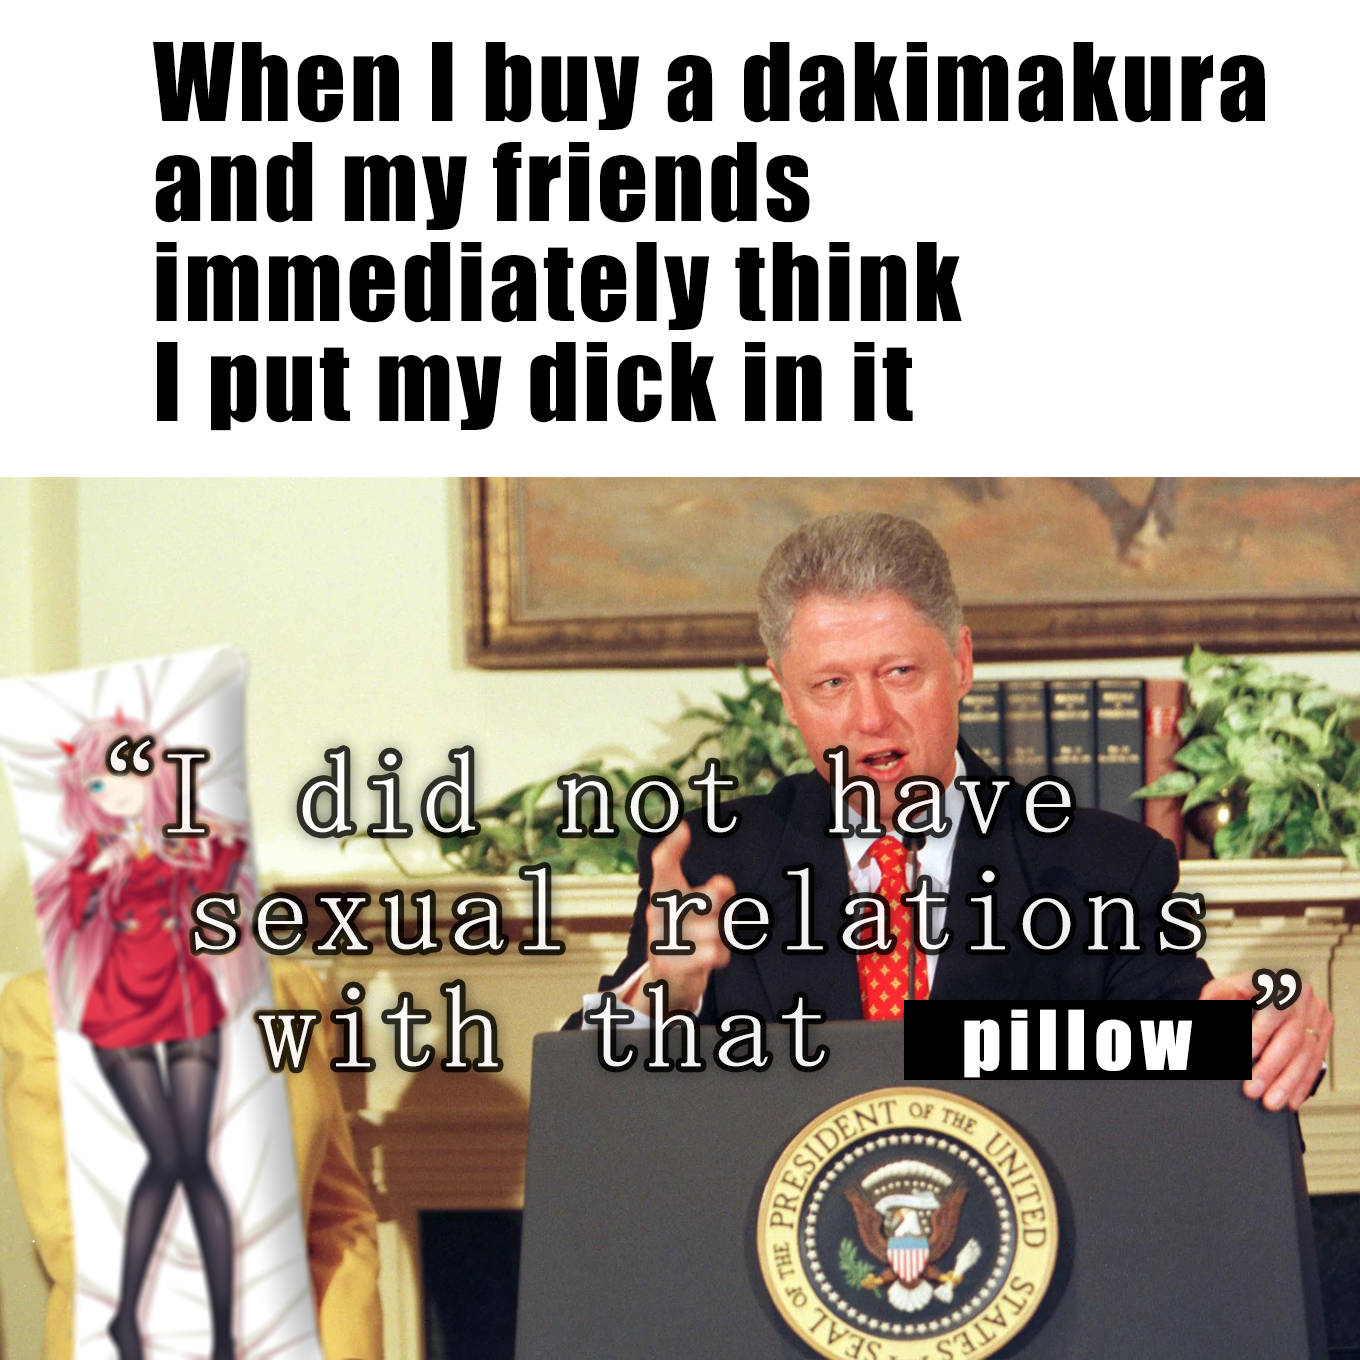 Bodypillow for the uncultured